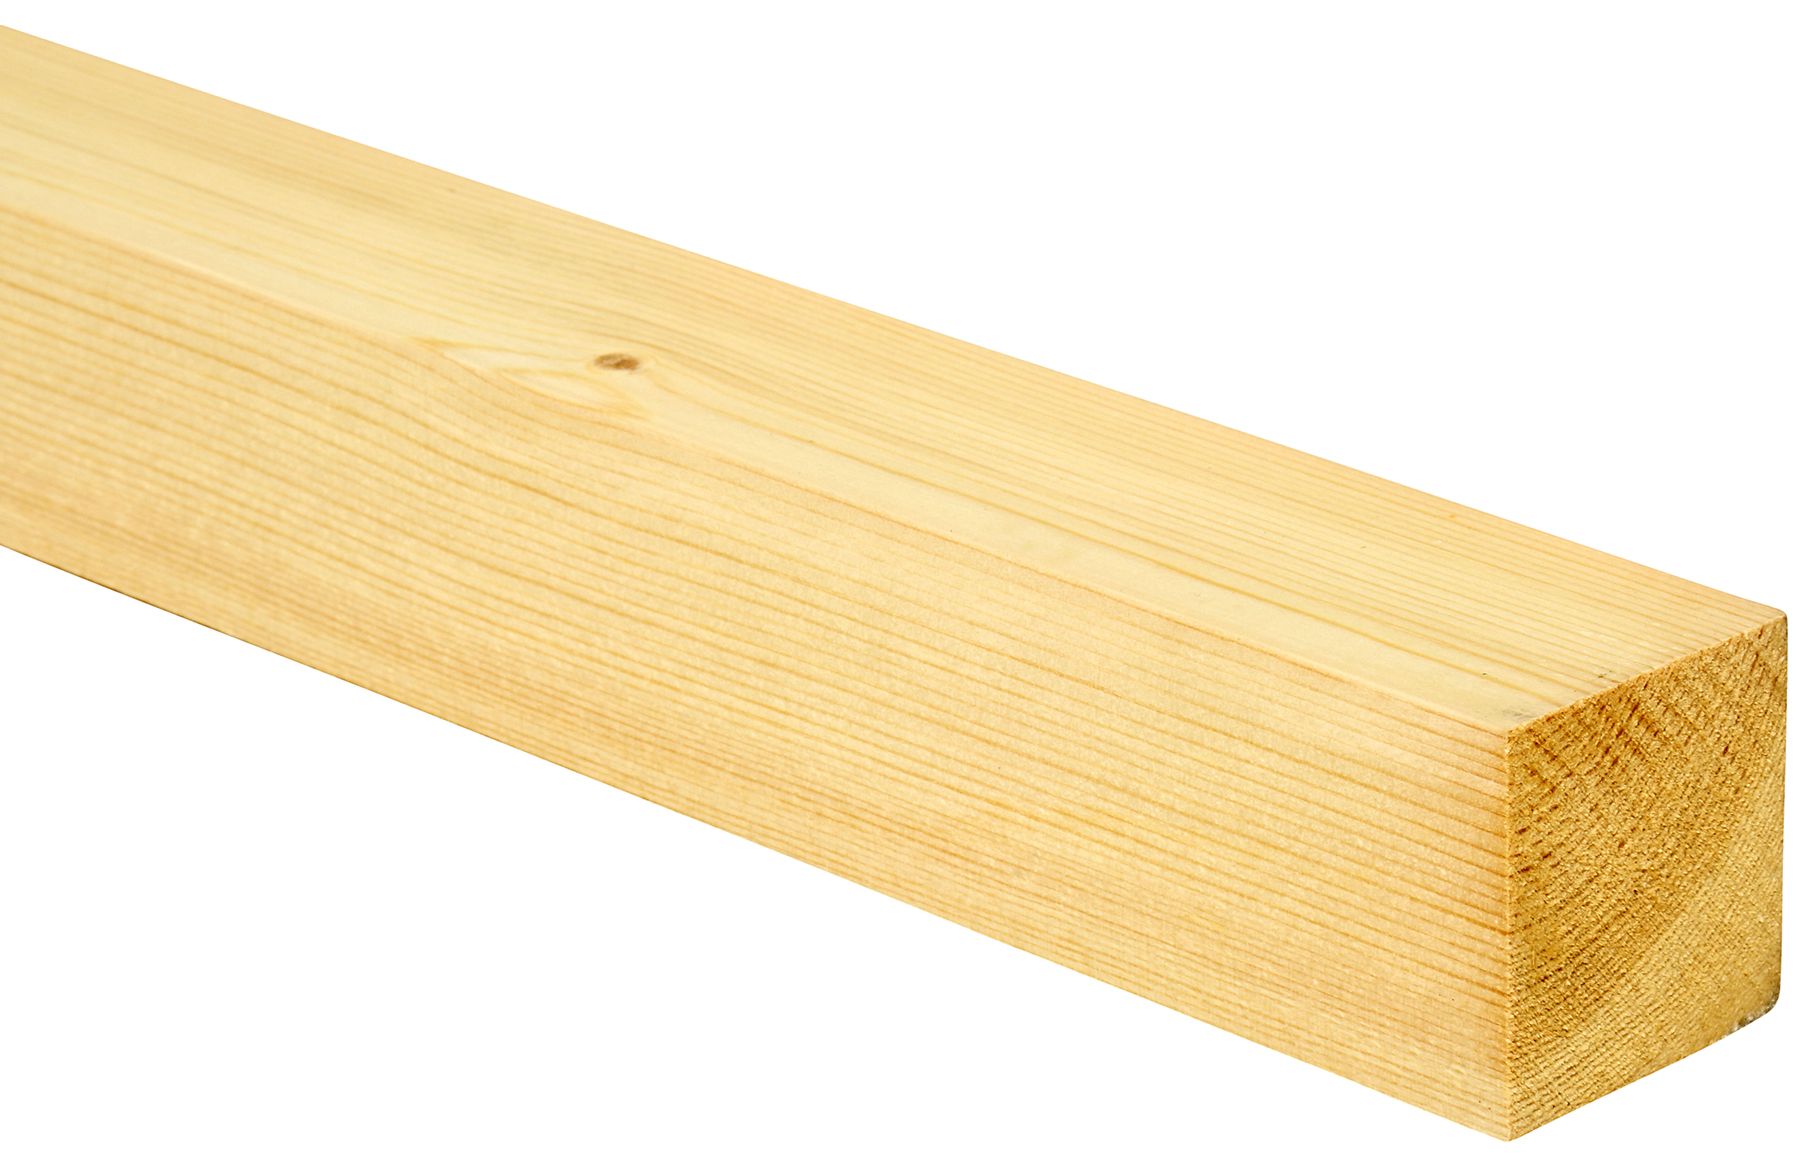 Image of Wickes Redwood PSE Timber - 44 x 44 x 1800mm